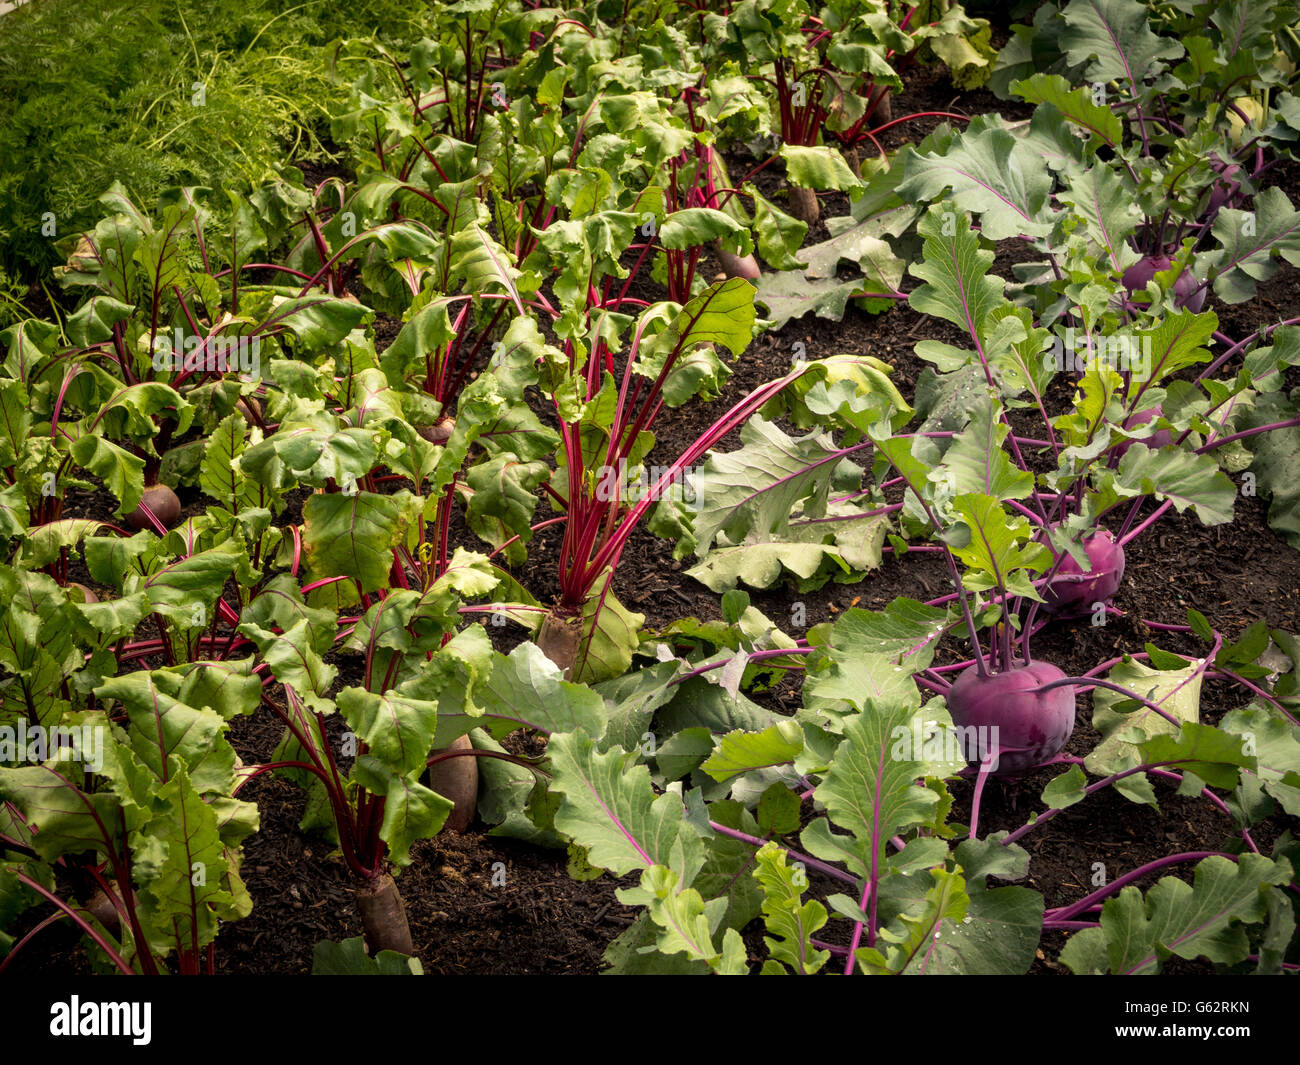 Kohlrabi and beetroot growing in allotment bed, Stock Photo